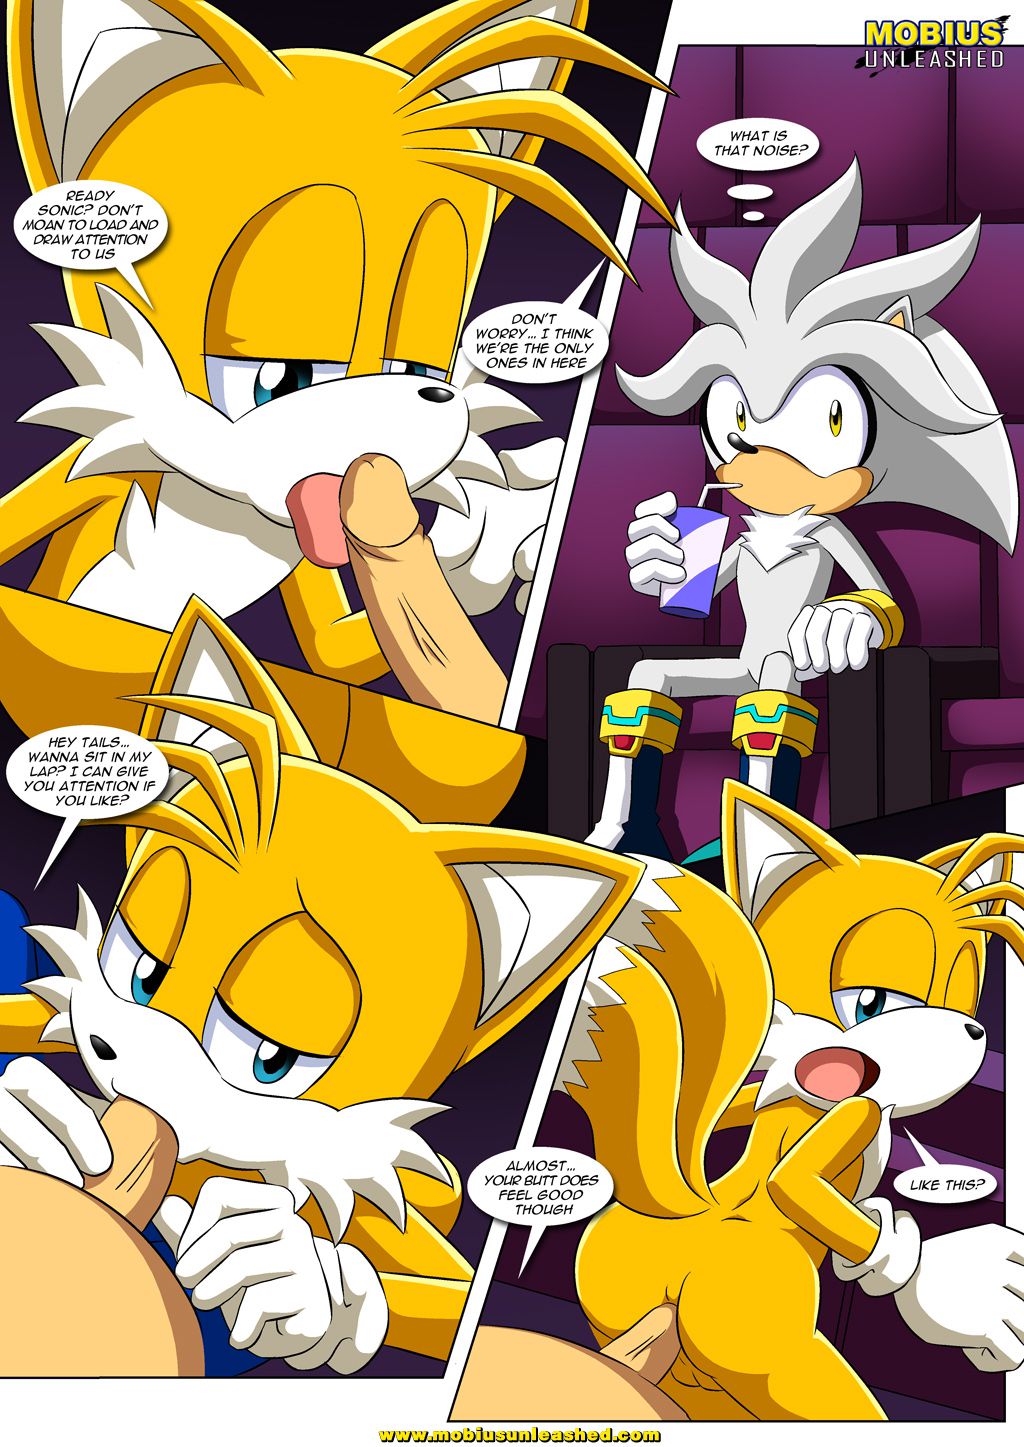 [Palcomix] The Pact 2 (Sonic The Hedgehog) [Ongoing] 5